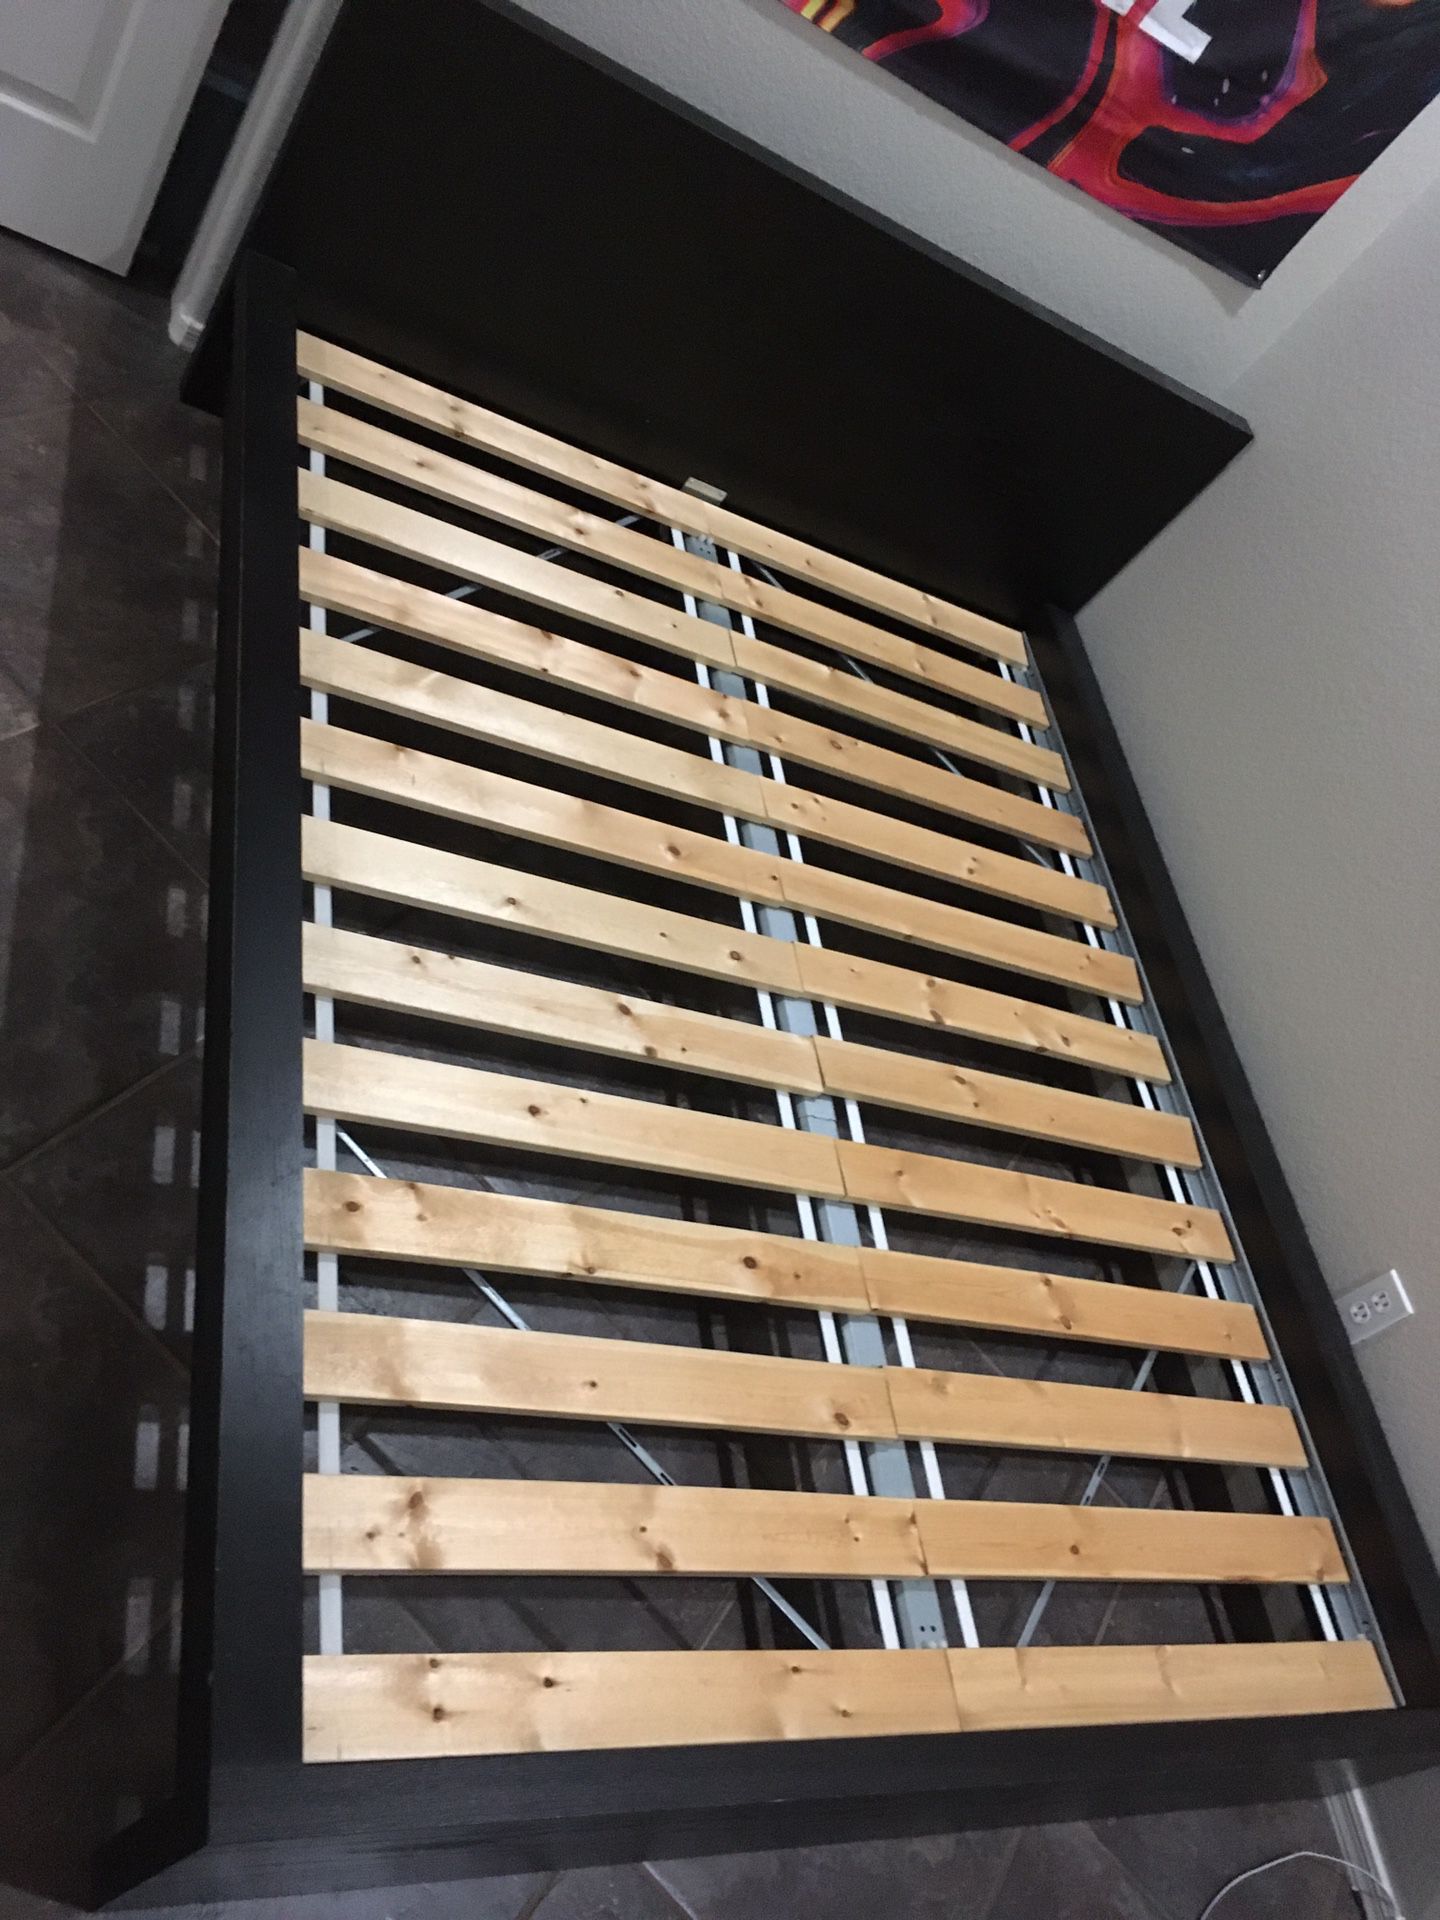 IKEA Malm Queen bed frame with Slats